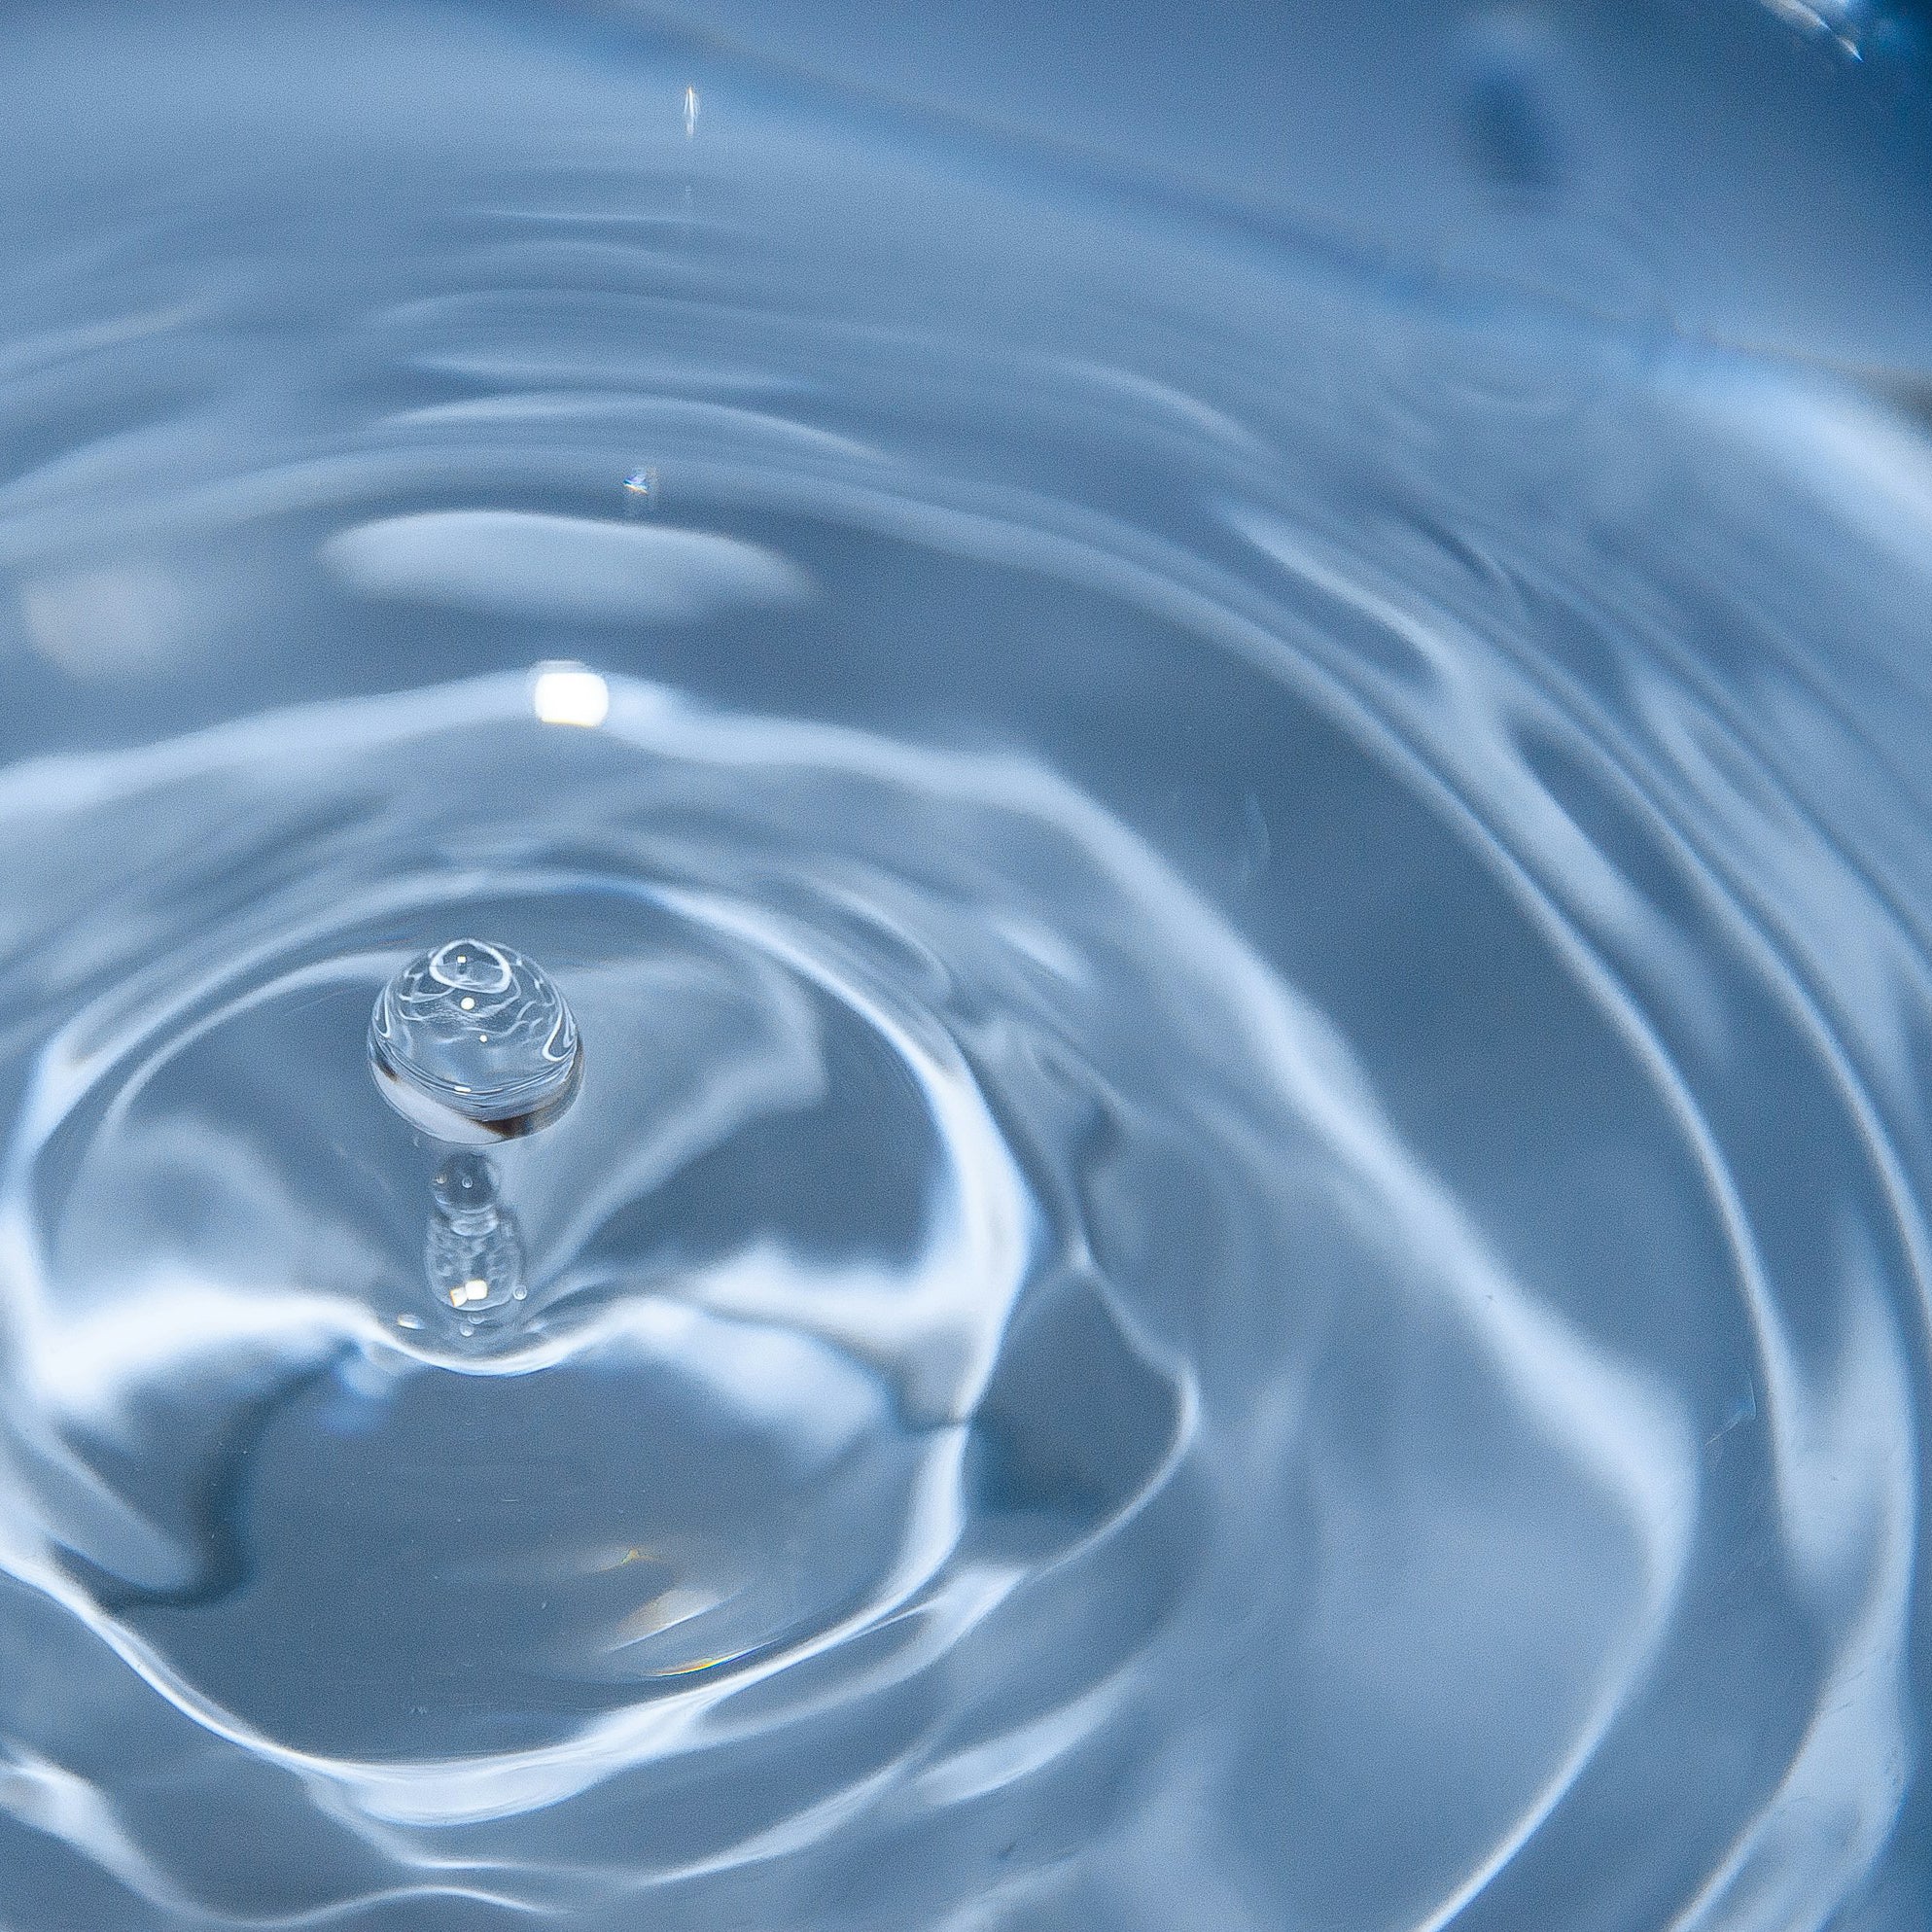 A close-up shot of a droplet of water creating ripples as it splashes into a calm water surface. The image captures the moment the droplet makes contact, forming concentric circles spreading outward in the clear blue water.